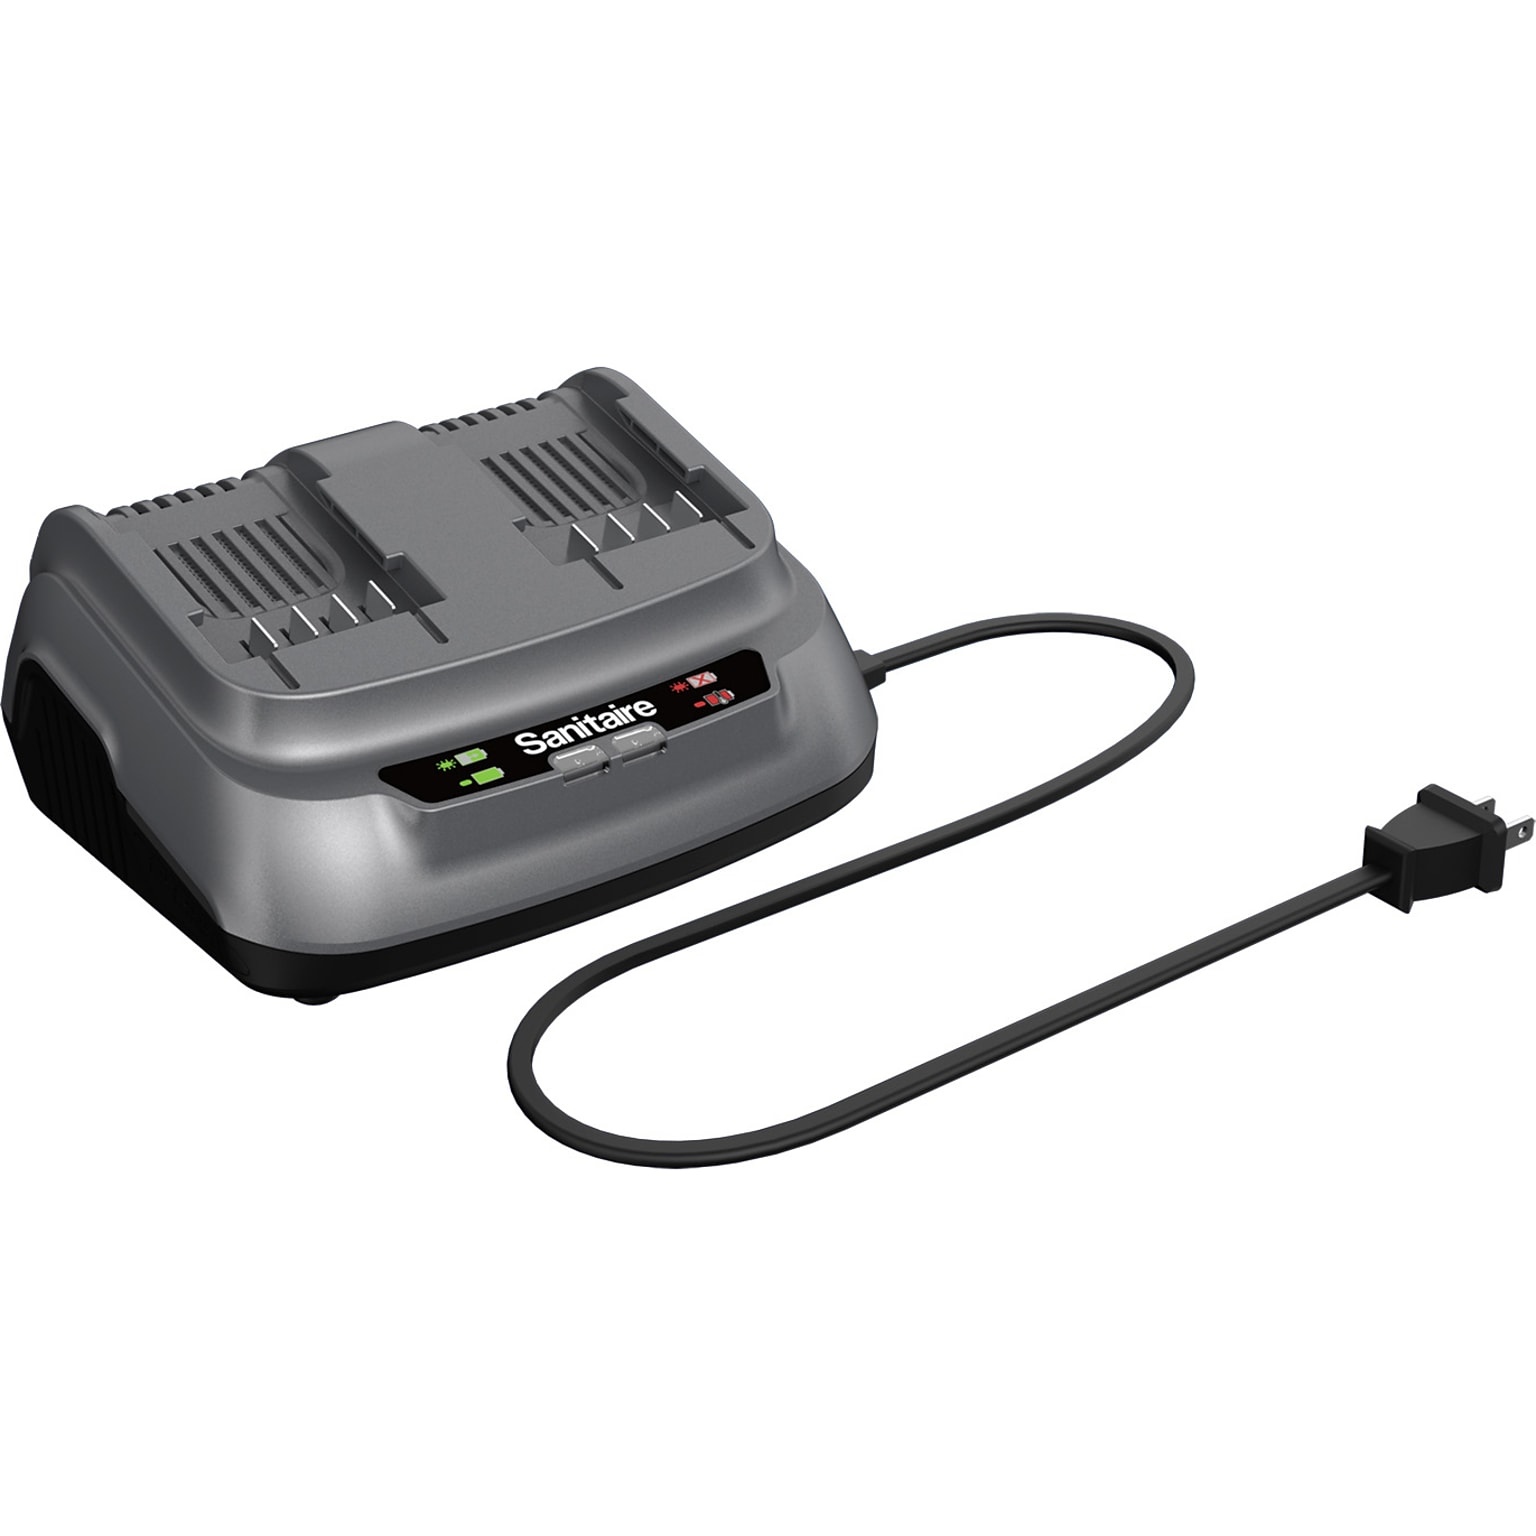 Sanitaire Transport Vacuum Replacement Charging Station, Gray/Black (3717)